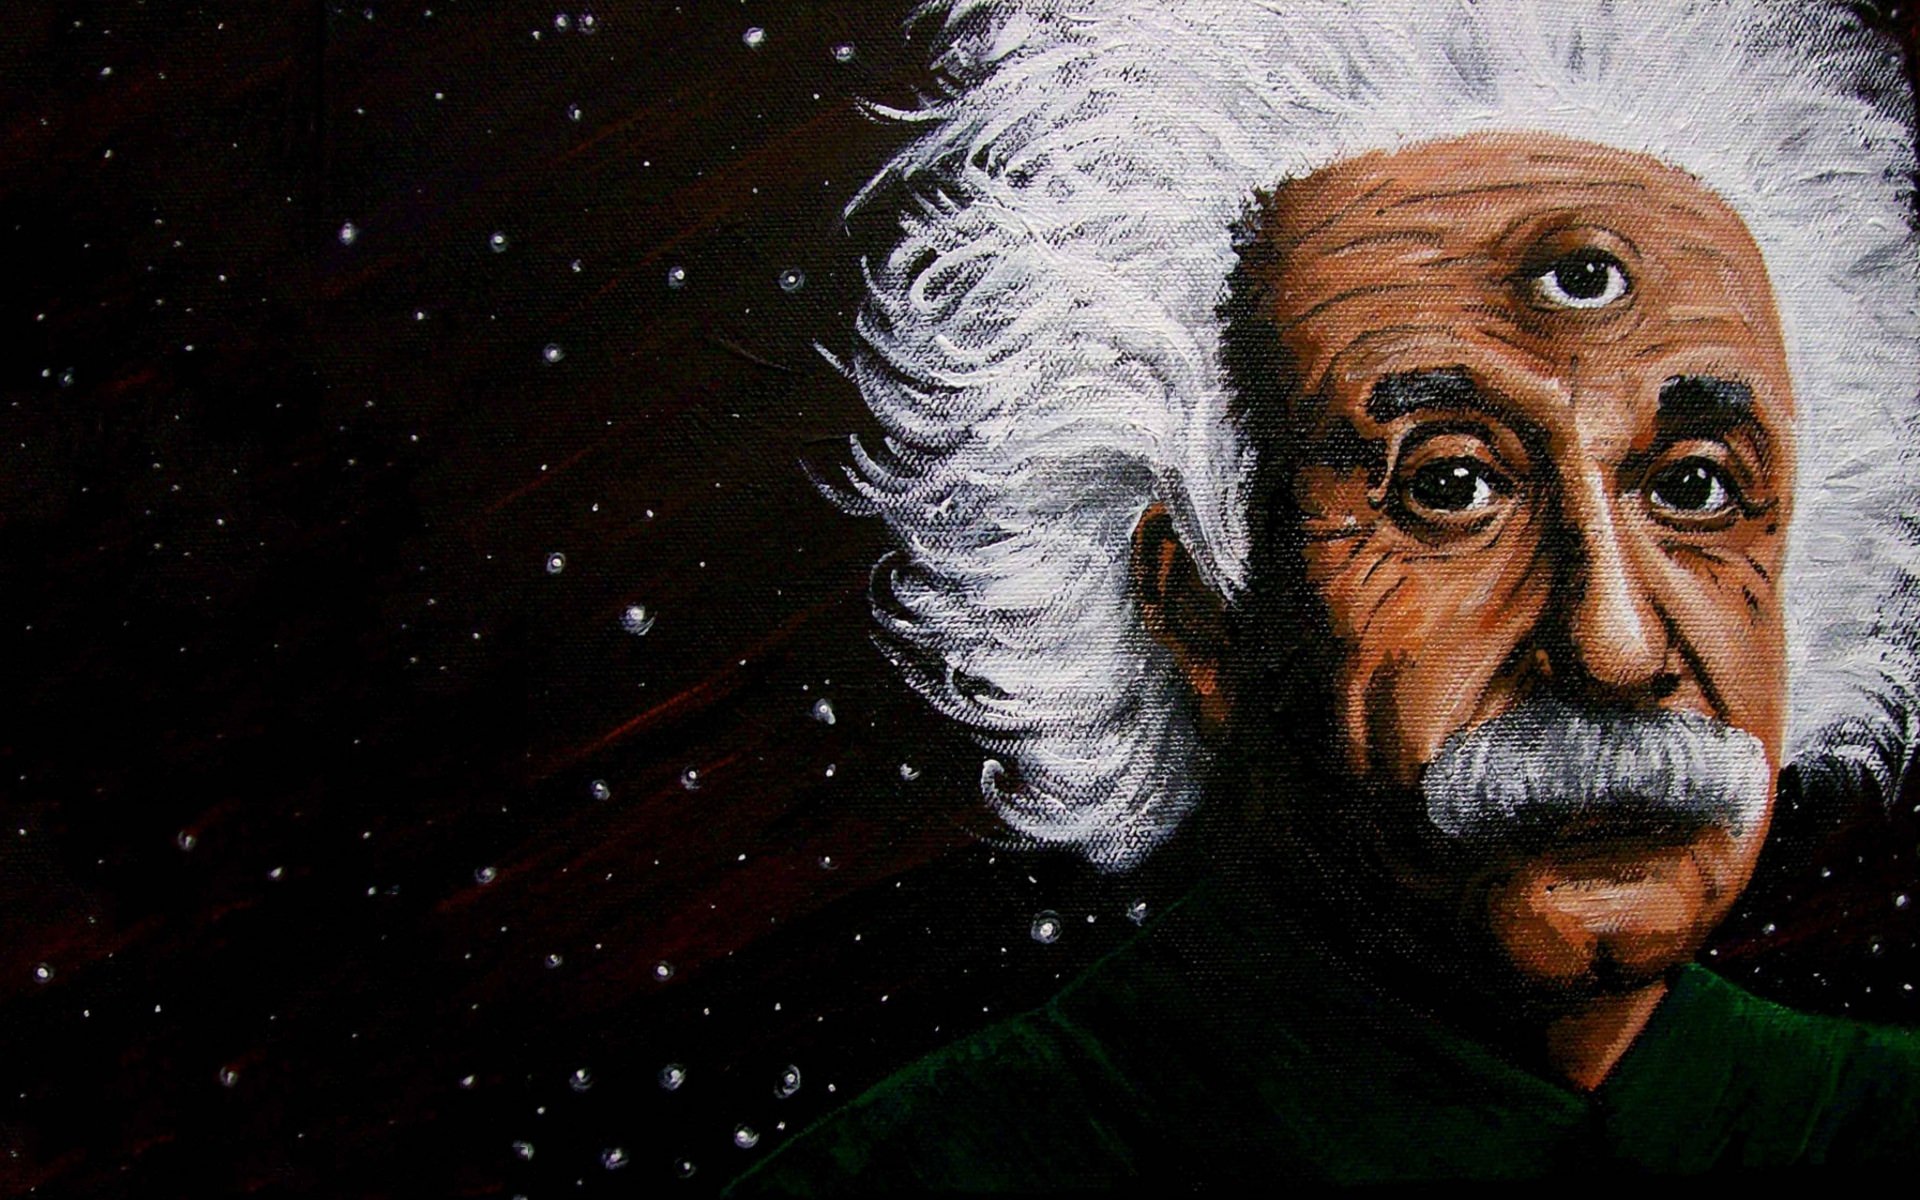 Download Albert Einstein 1920x1080 4K 8K Free Ultra HD HQ Display Pictures  Backgrounds Images Wallpaper 